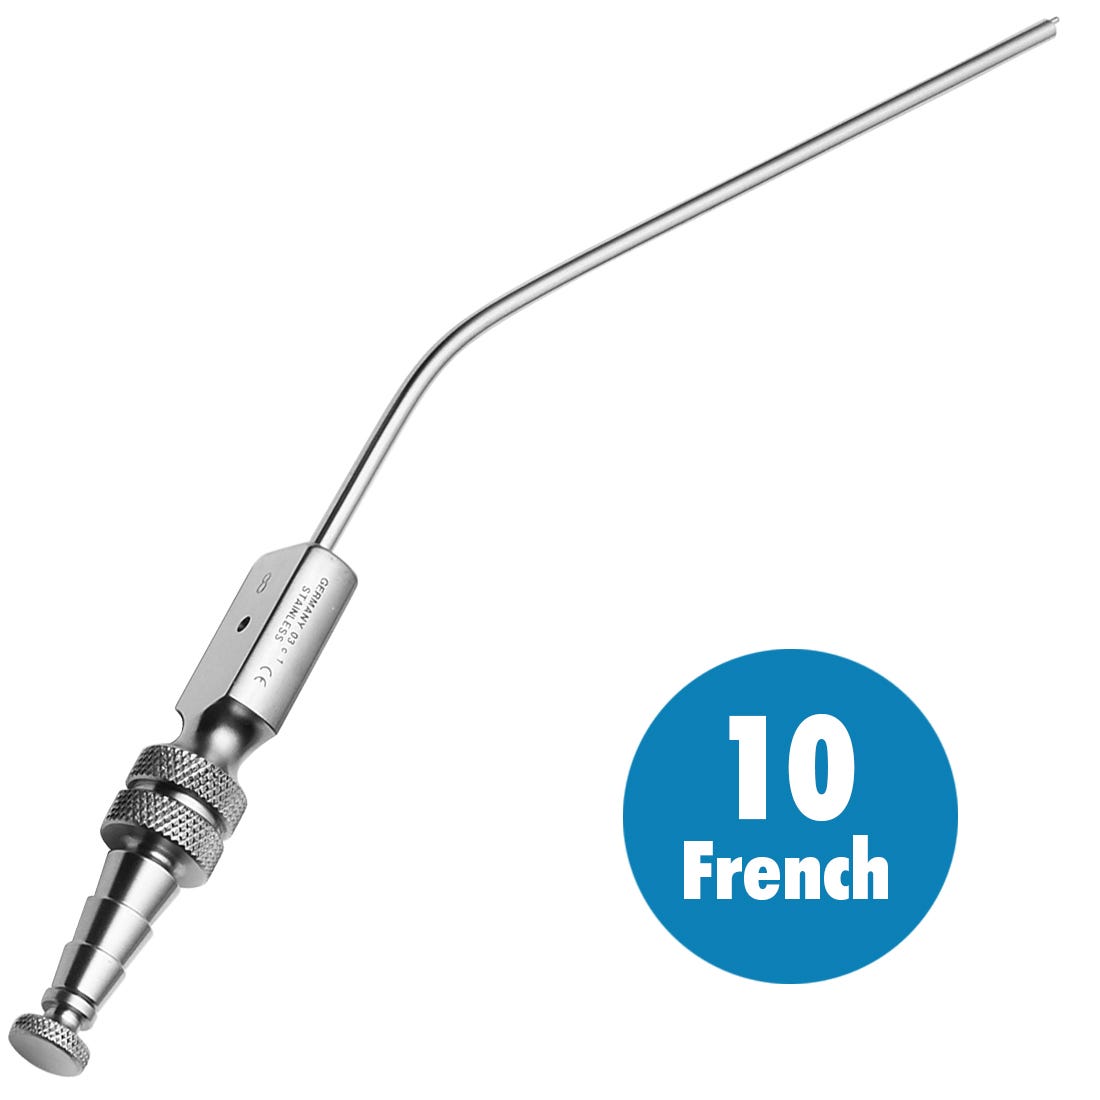 Frazier Suction Tip, 10 French, approx 3.33mm opening, 30 degree angle, delicate tip